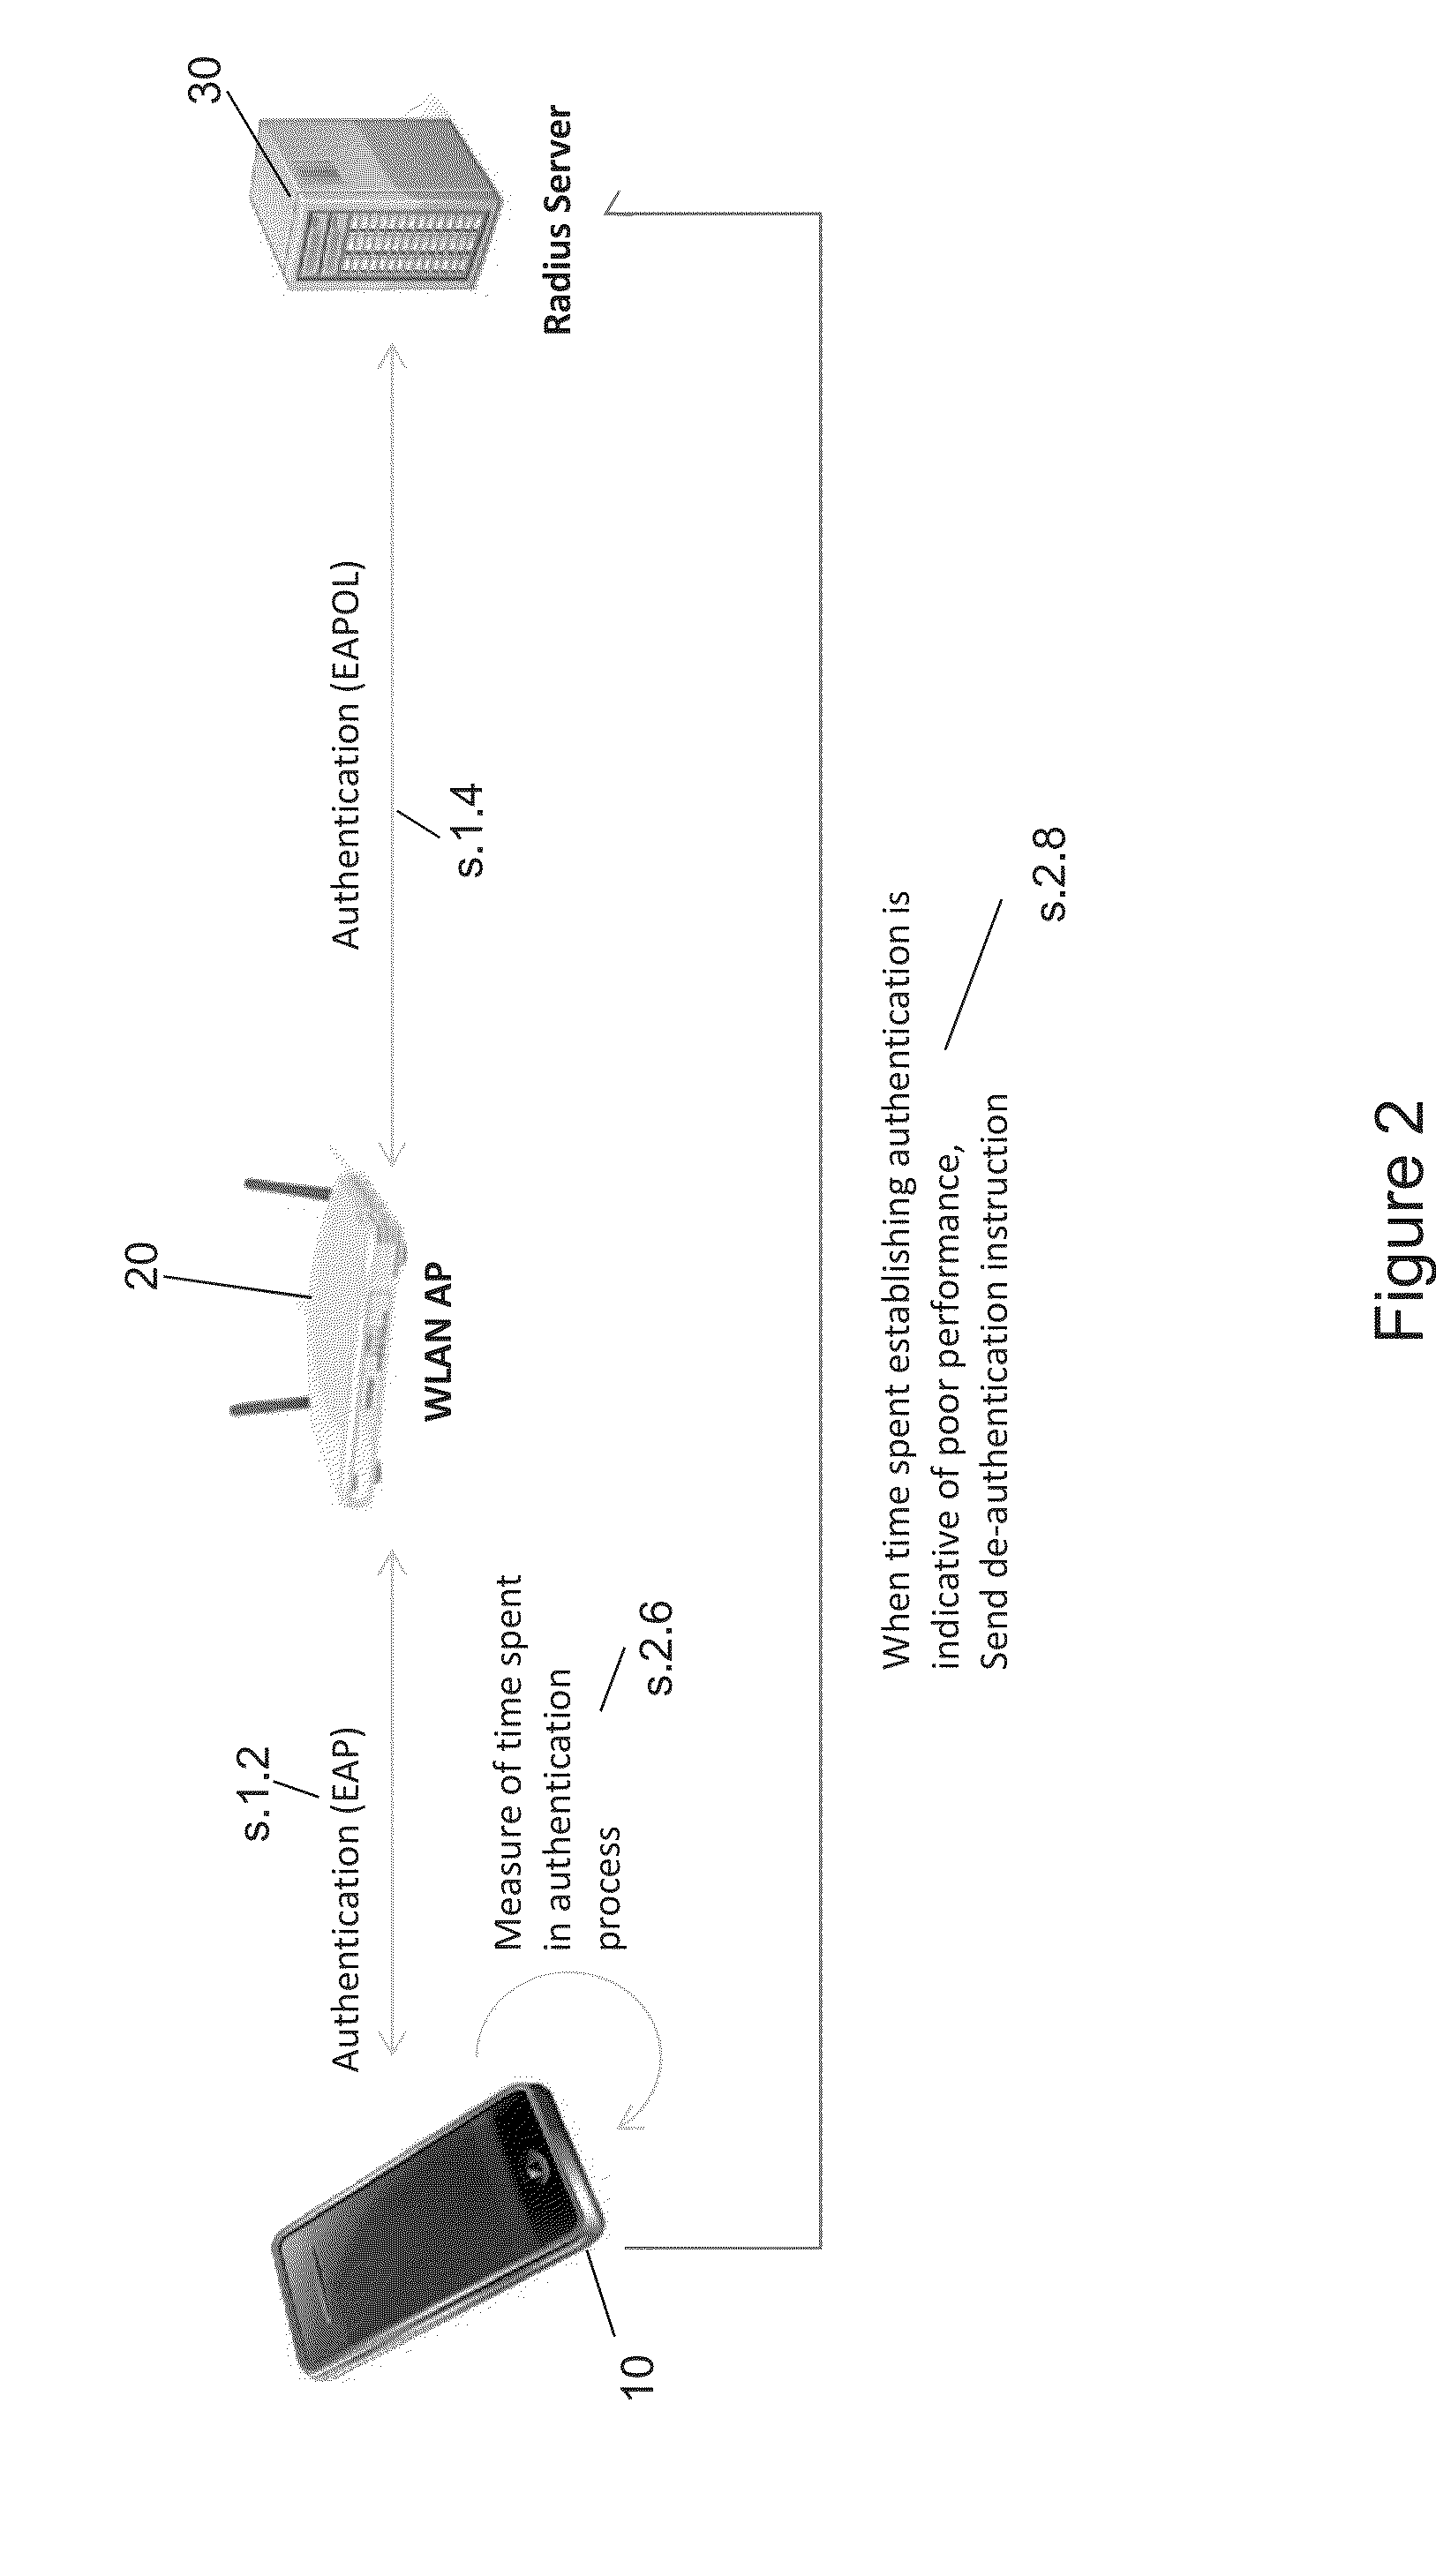 Method and System for WLAN Connection Control